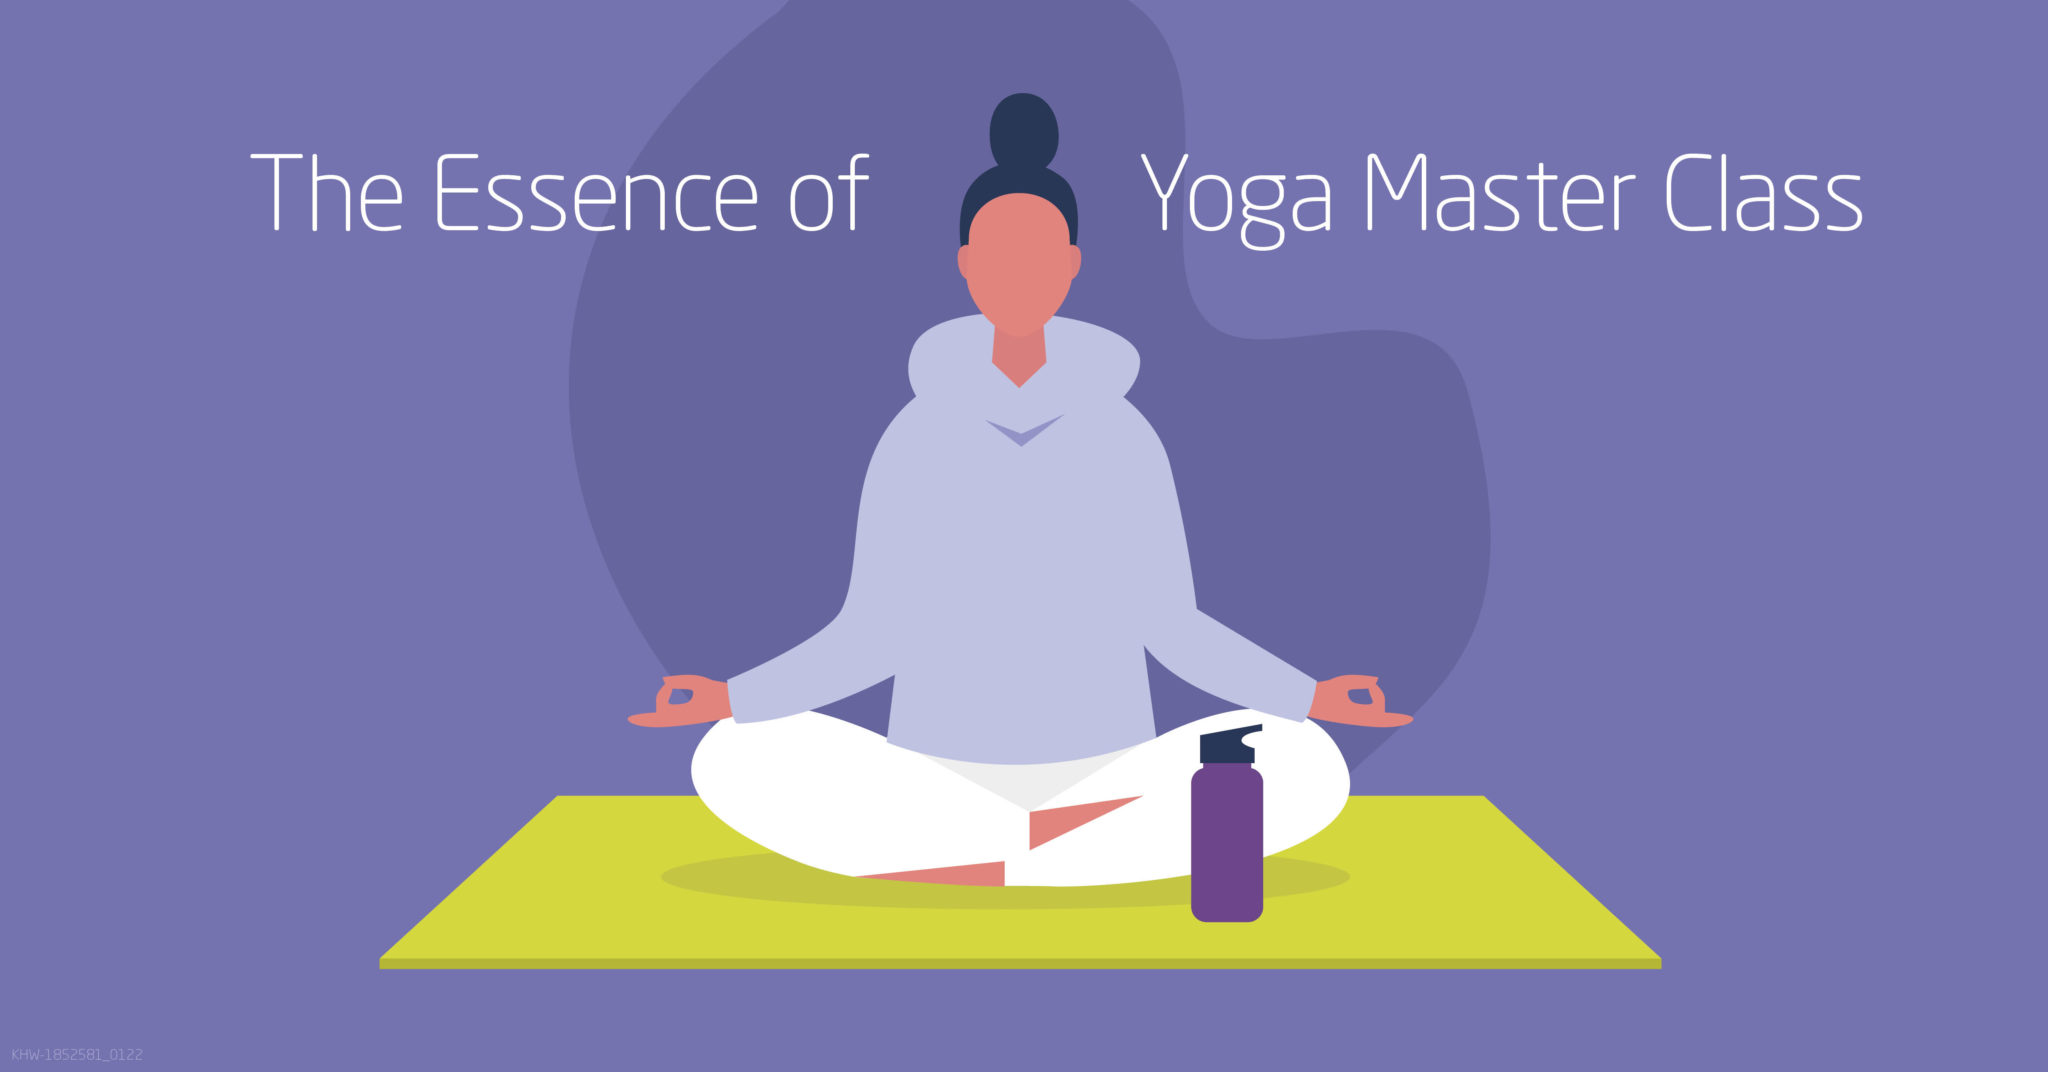 The Essence of Yoga Master Class